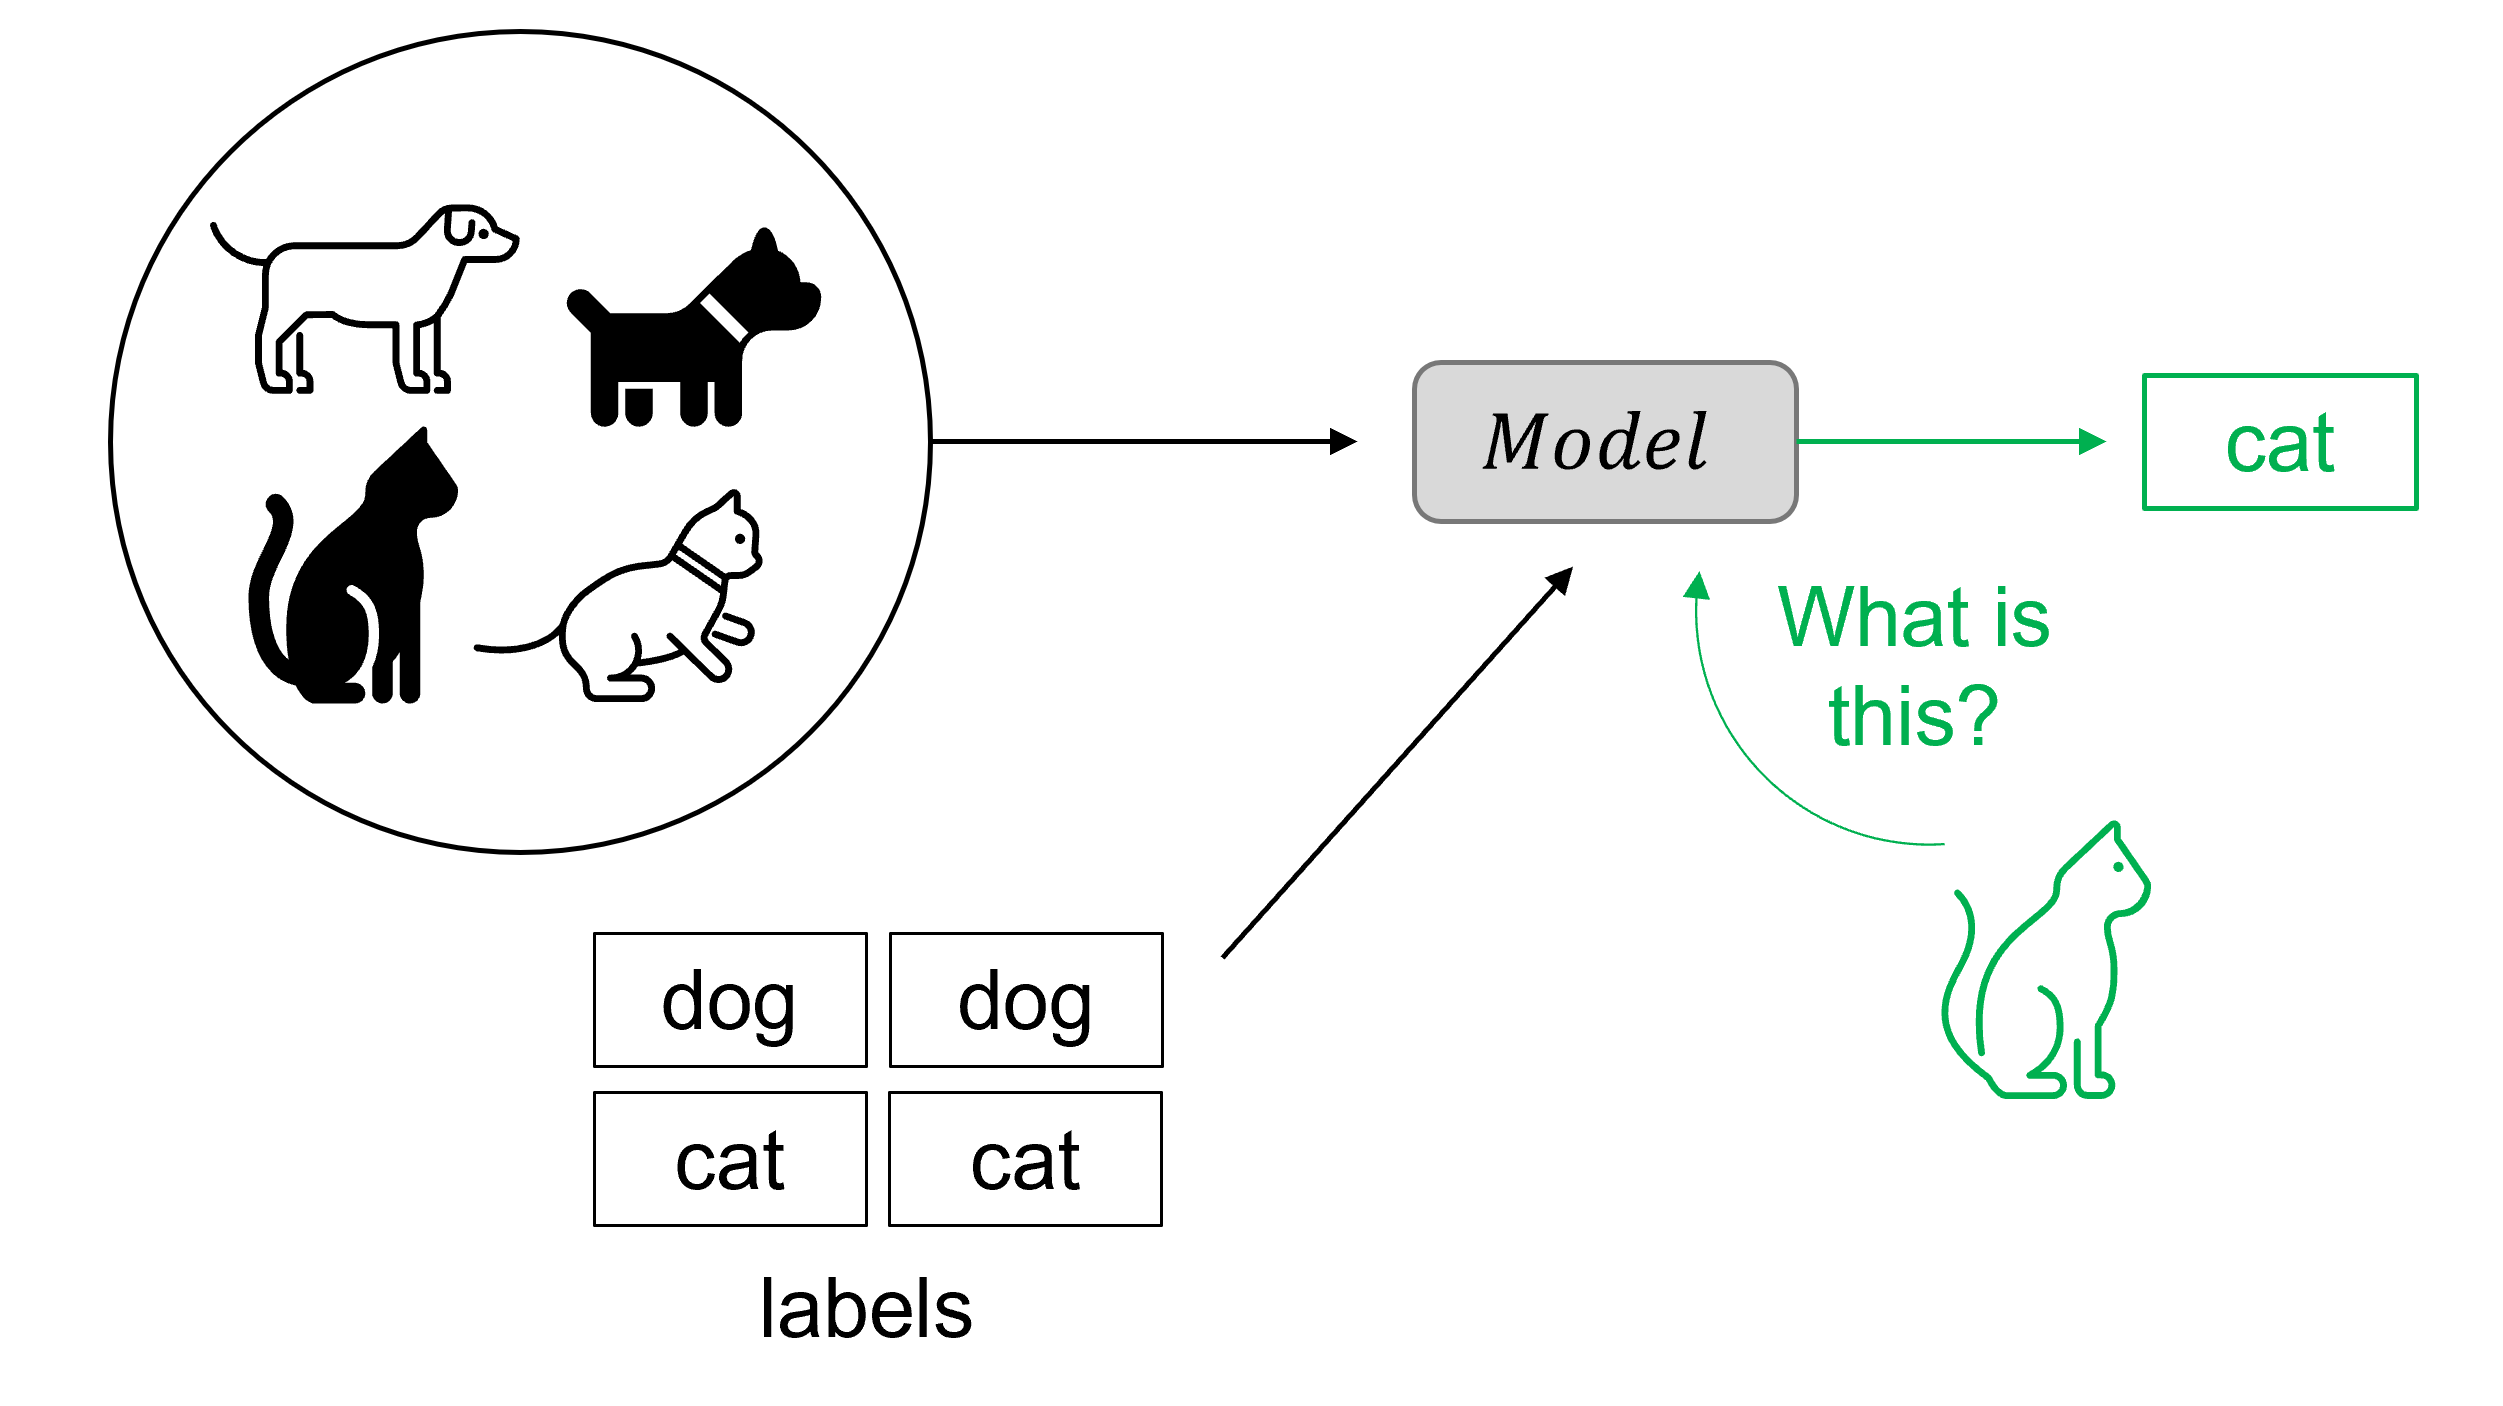 2 arrows going form either images of cats and dogs, or labels(anmes) into a squre called "Model". image of a green cat also point to the model box. Green arrow coming out of the model box onto a label saying cat